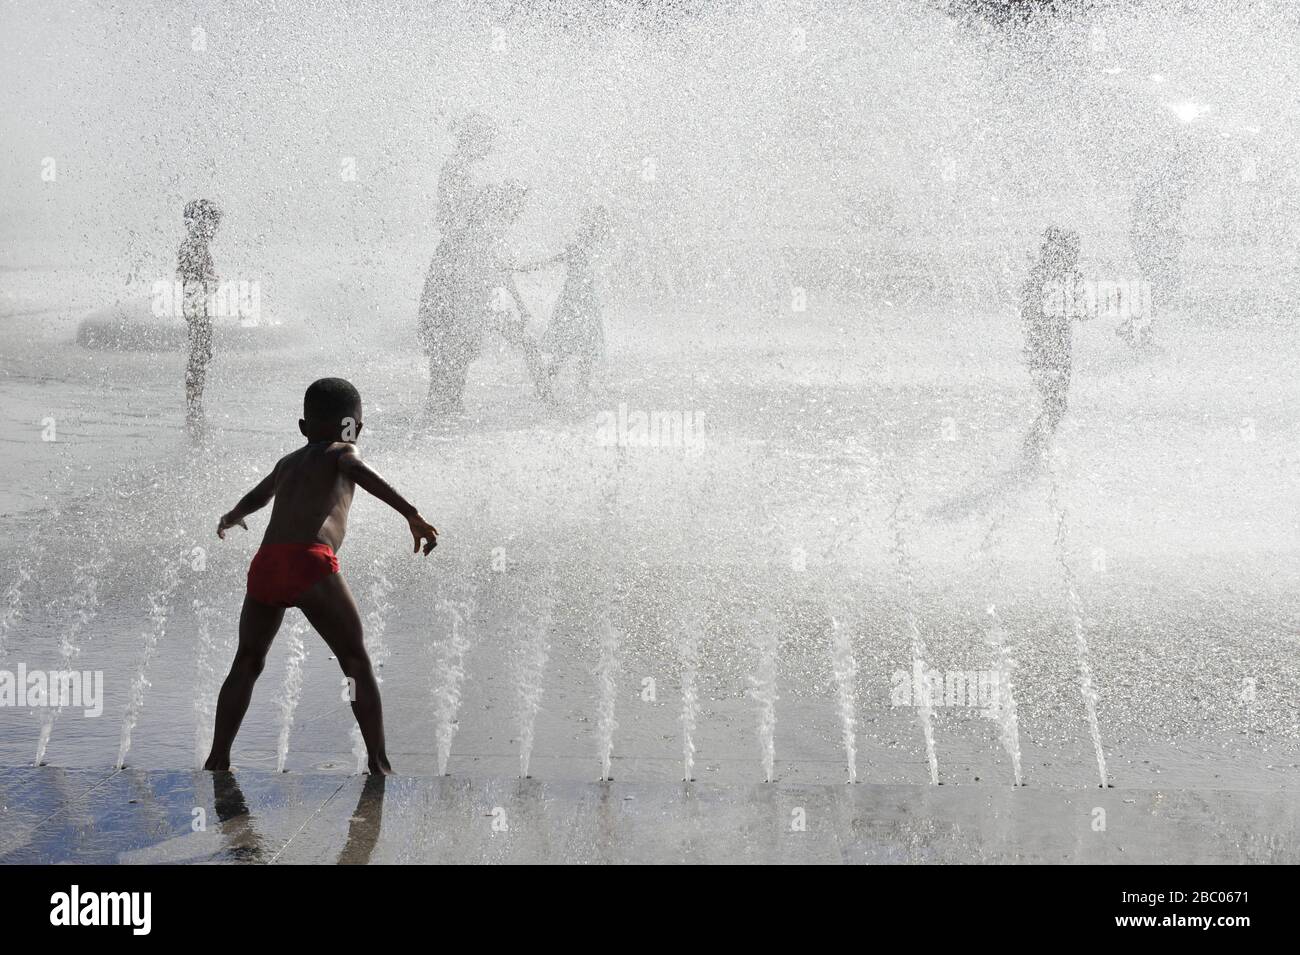 On a hot summer's day, children seek cooling in the spray of the Stachus fountain in downtown Munich. [automated translation] Stock Photo